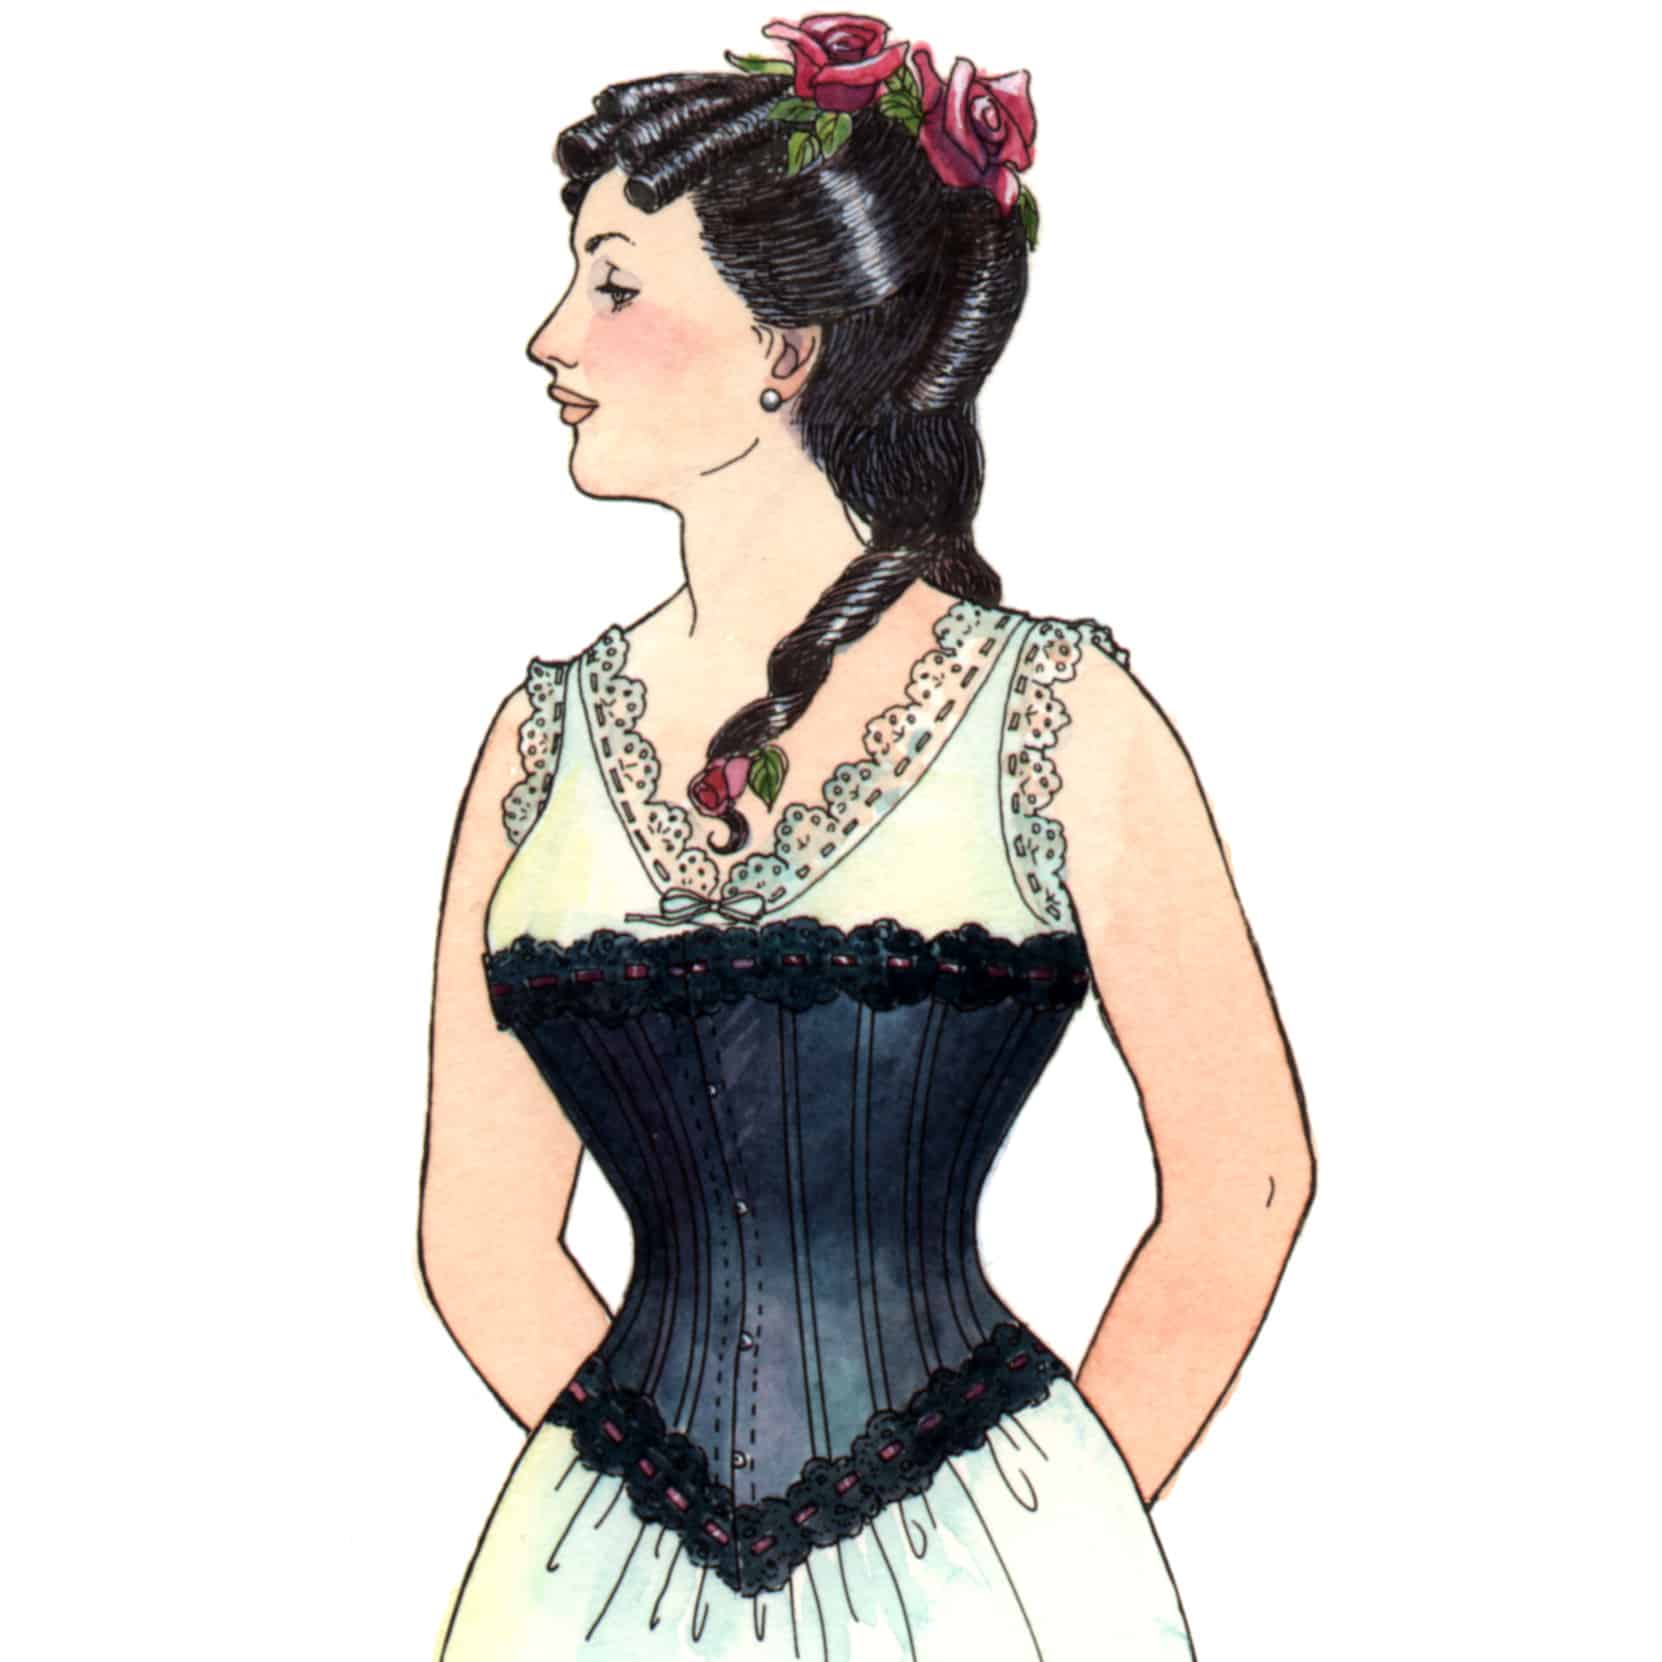 Late 1890s Corset Sewing Pattern Bust Sizes 32-48 Past Patterns